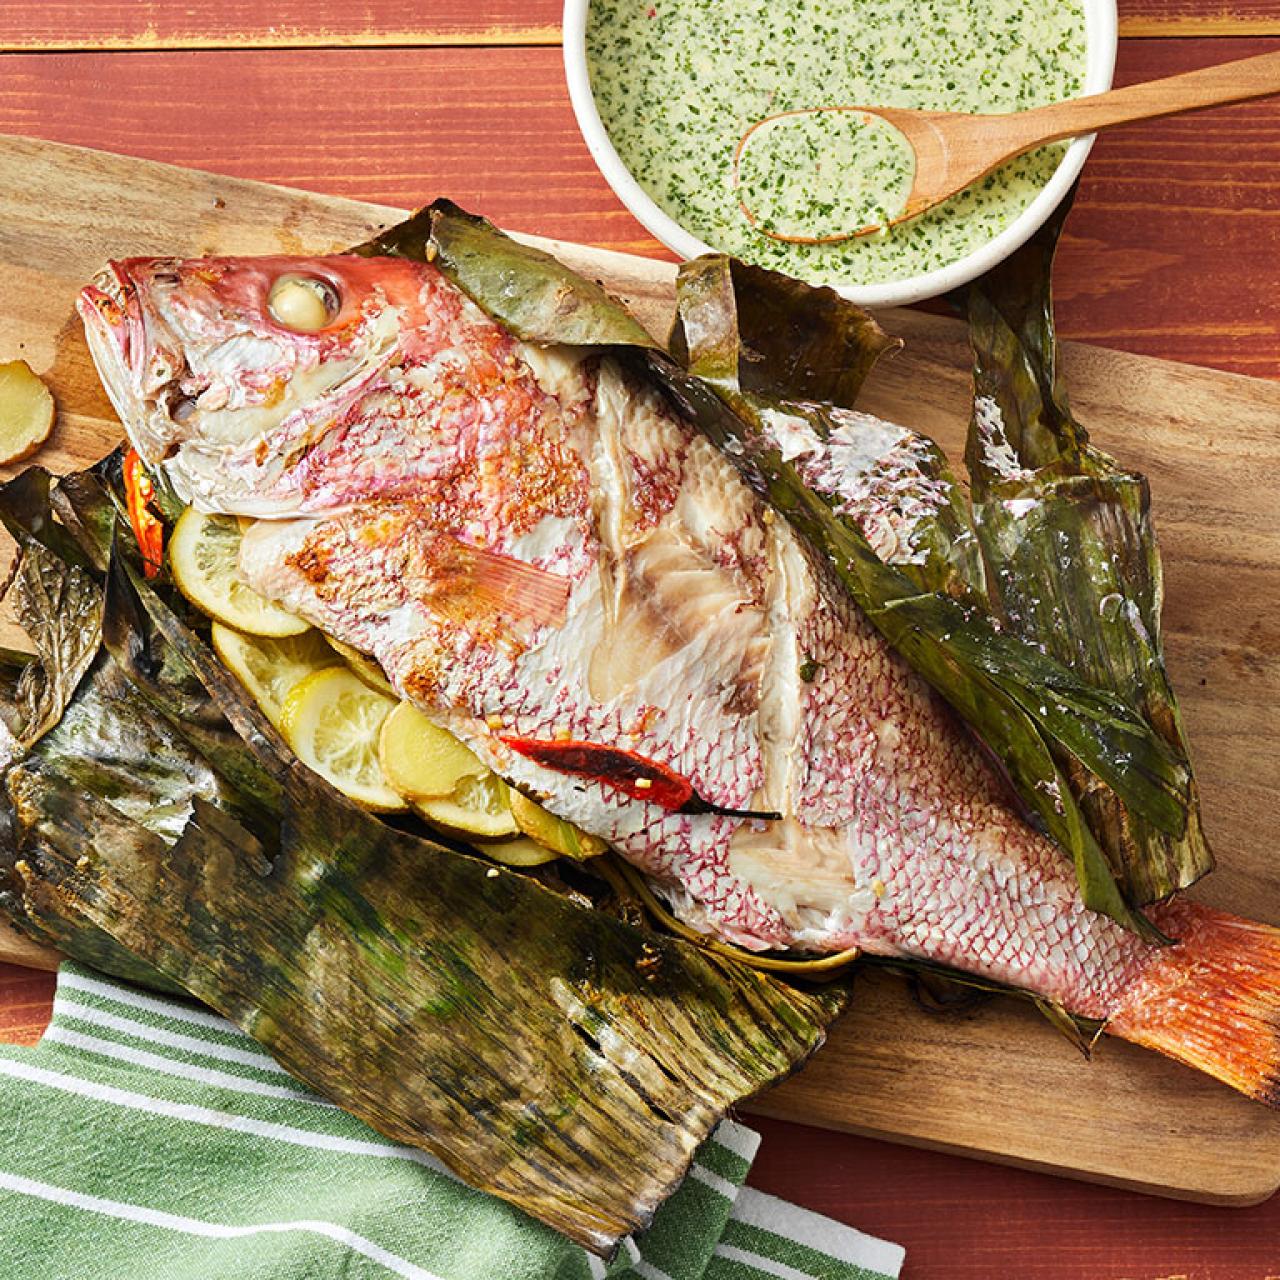 Lime and chilli fish baked in banana leaves